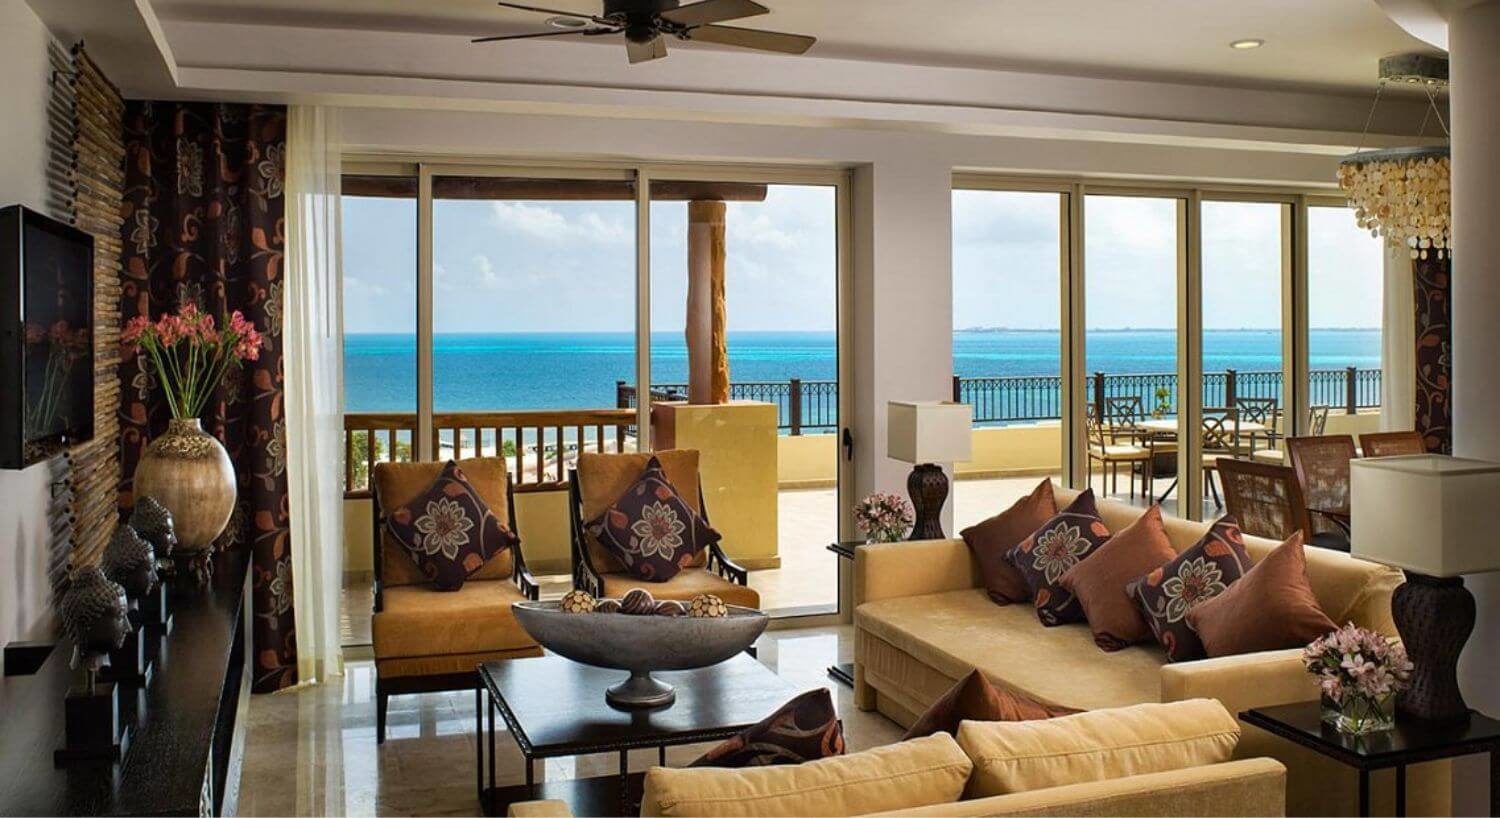 A comfortable living room with plush tan sofas and chairs, a dresser and TV along one wall, a dining area behind the living area, and sliding doors leading out to a large private terrace with patio furniture, and stunning views of the turquoise Caribbean sea.